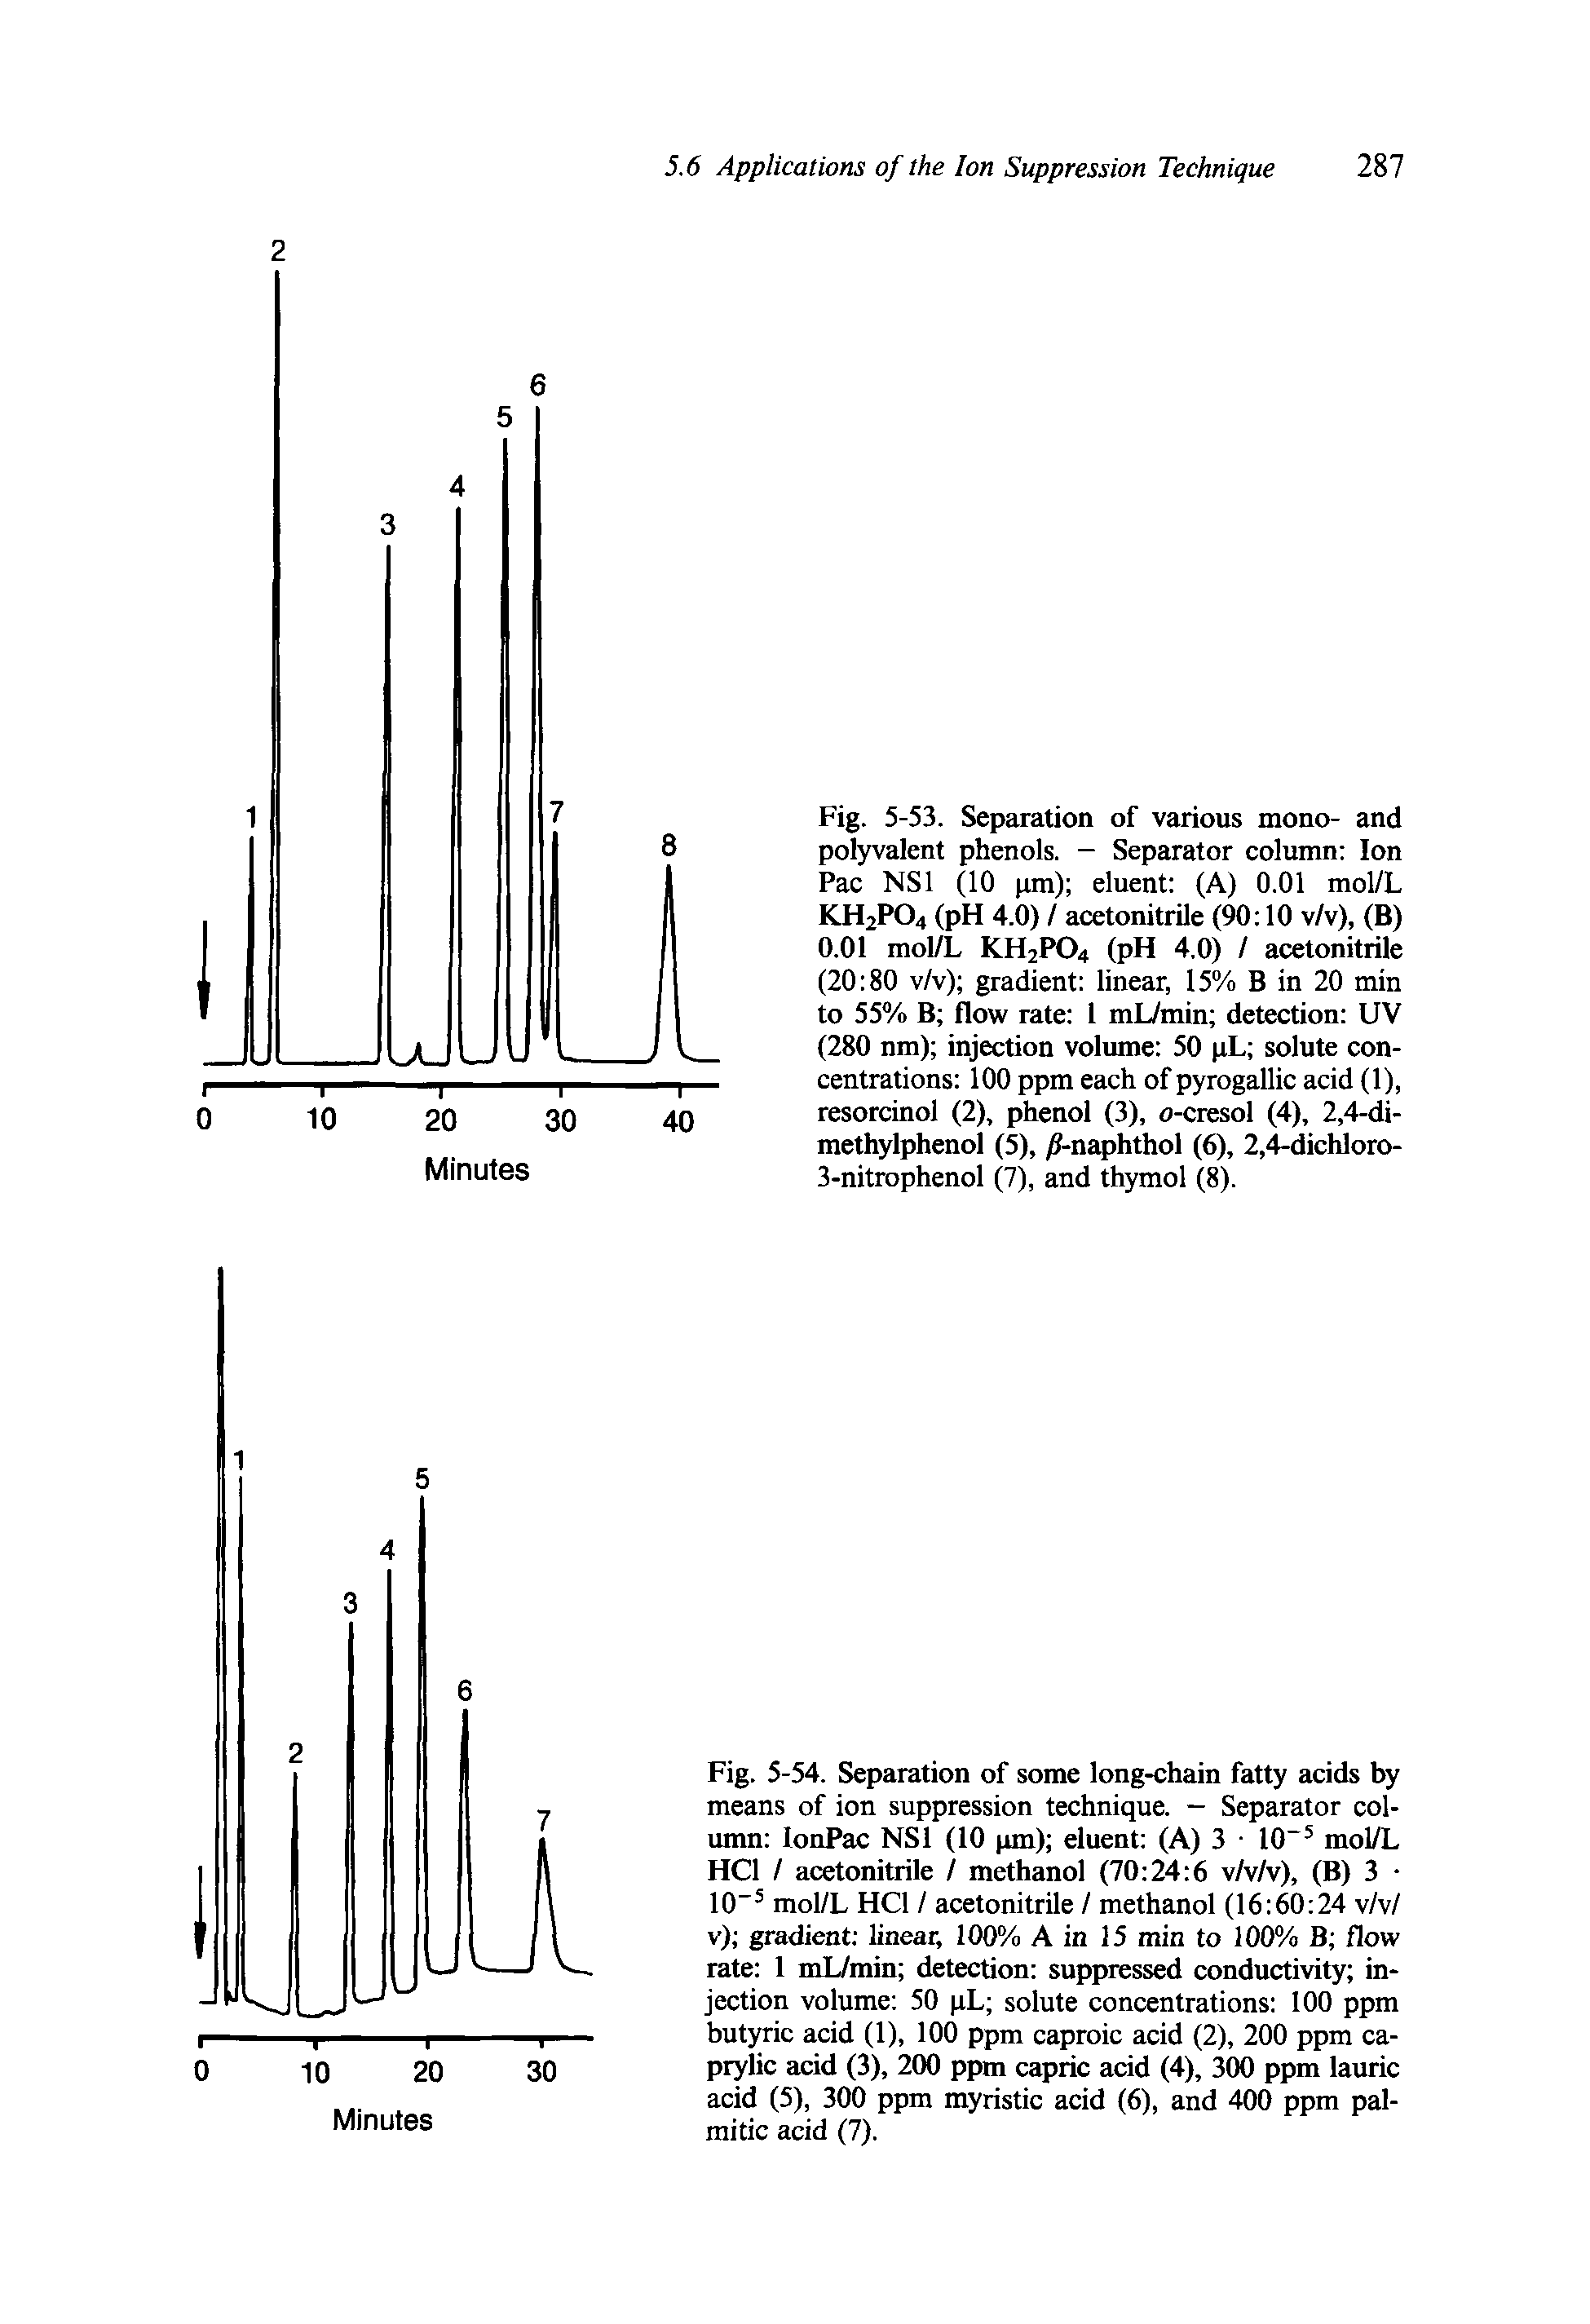 Fig. 5-54. Separation of some long-chain fatty acids by means of ion suppression technique. - Separator column IonPac NS1 (10 pm) eluent (A) 3 10 5 mol/L HC1 / acetonitrile / methanol (70 24 6 v/v/v), (B) 3 10-5 mol/L HC1 / acetonitrile / methanol (16 60 24 v/v/ v) gradient linear, 100% A in 15 min to 100% B flow rate 1 mL/min detection suppressed conductivity injection volume 50 pL solute concentrations 100 ppm butyric acid (1), 100 ppm caproic acid (2), 200 ppm ca-prylic acid (3), 200 ppm capric acid (4), 300 ppm lauric acid (5), 300 ppm myristic acid (6), and 400 ppm palmitic acid (7).